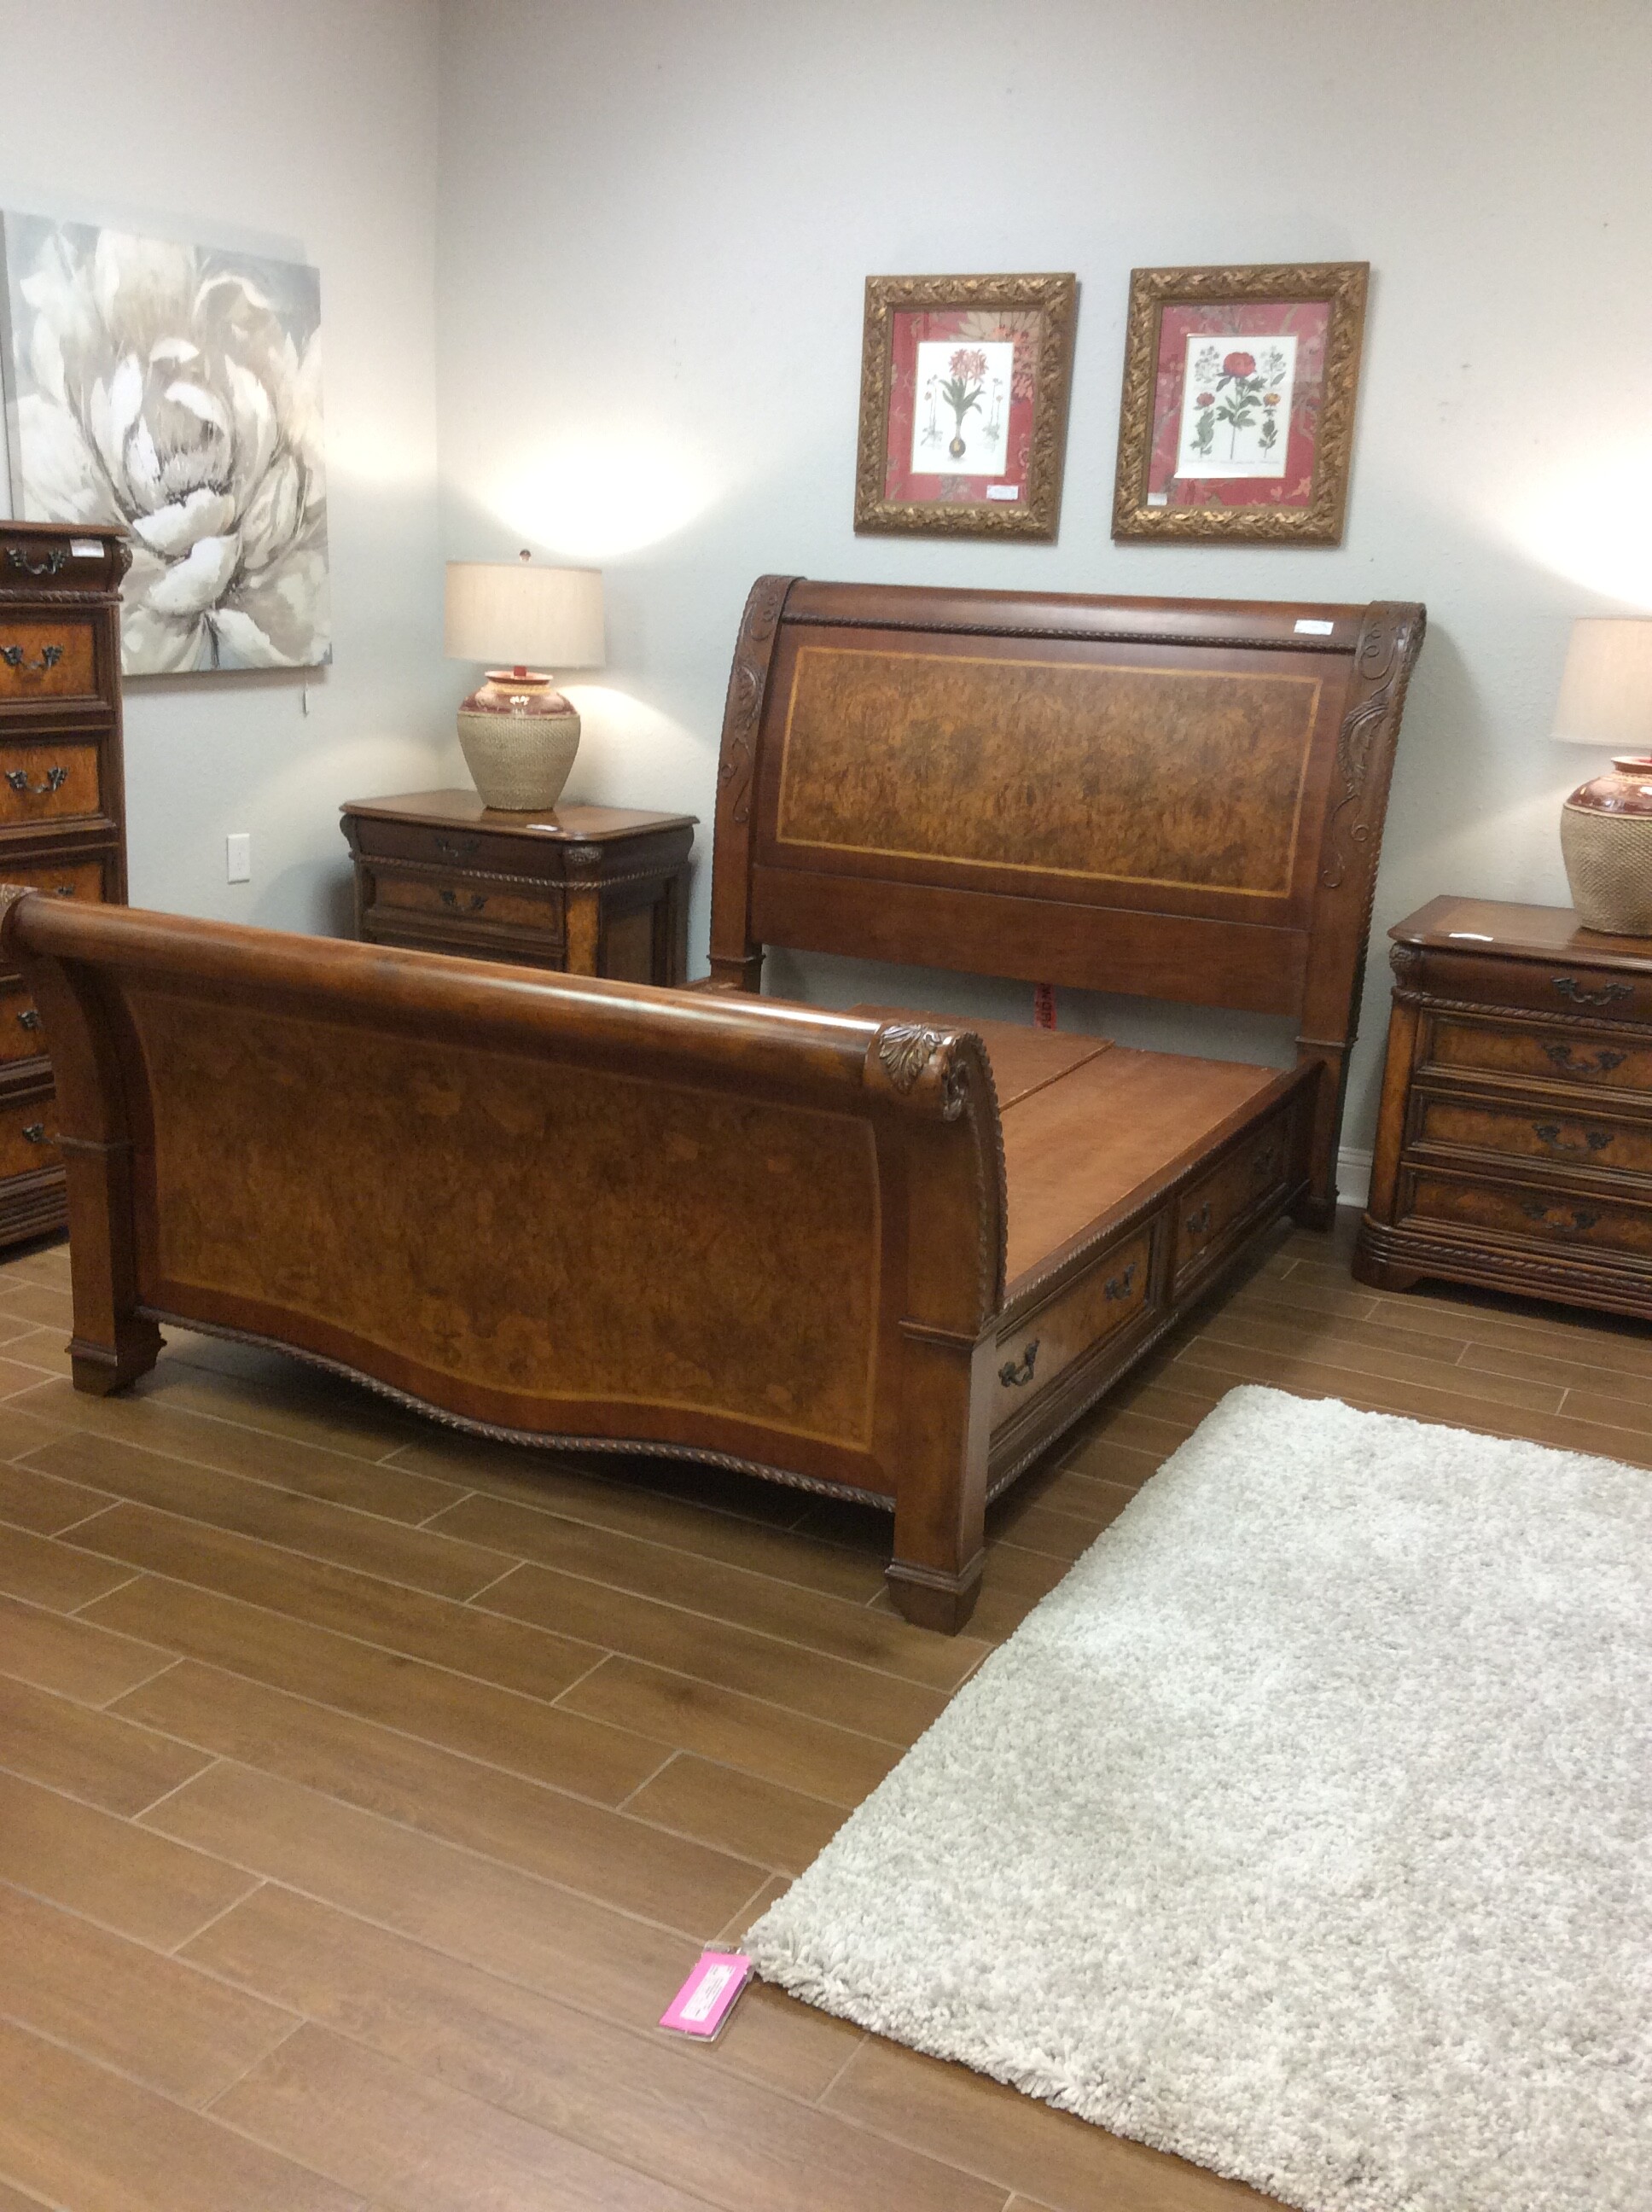 This is a beautiful 4-piece bedroom set from Aspenhome. The set includes a headboard, footboard, a pair of nightstands and a dresser with a mirror.